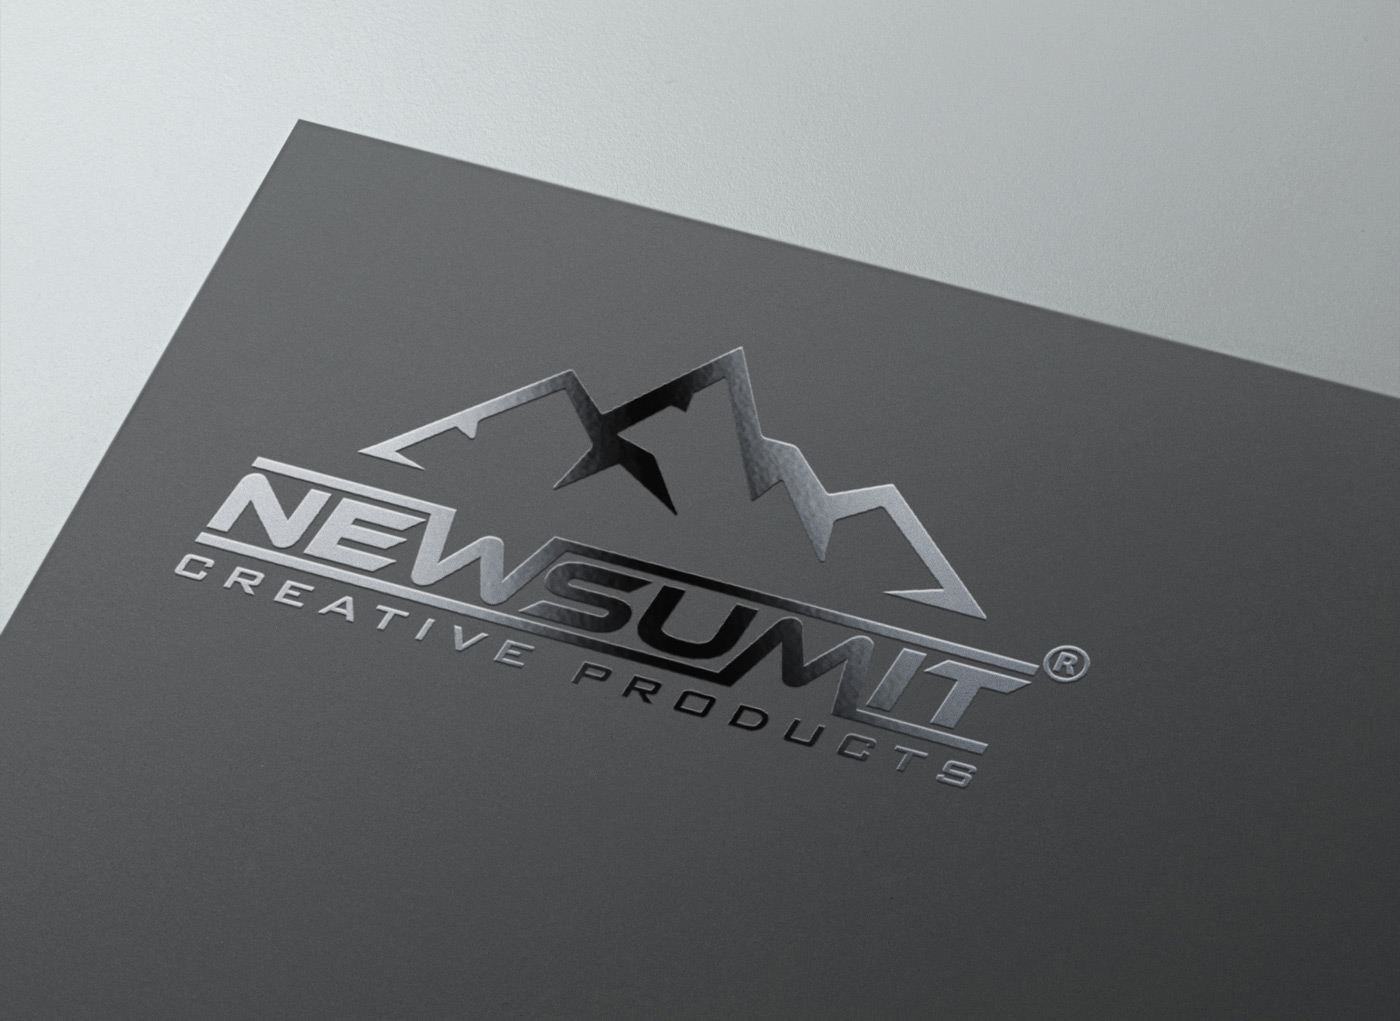 Portfolio of design works for the creation of logos and brands for sports products manufacturer